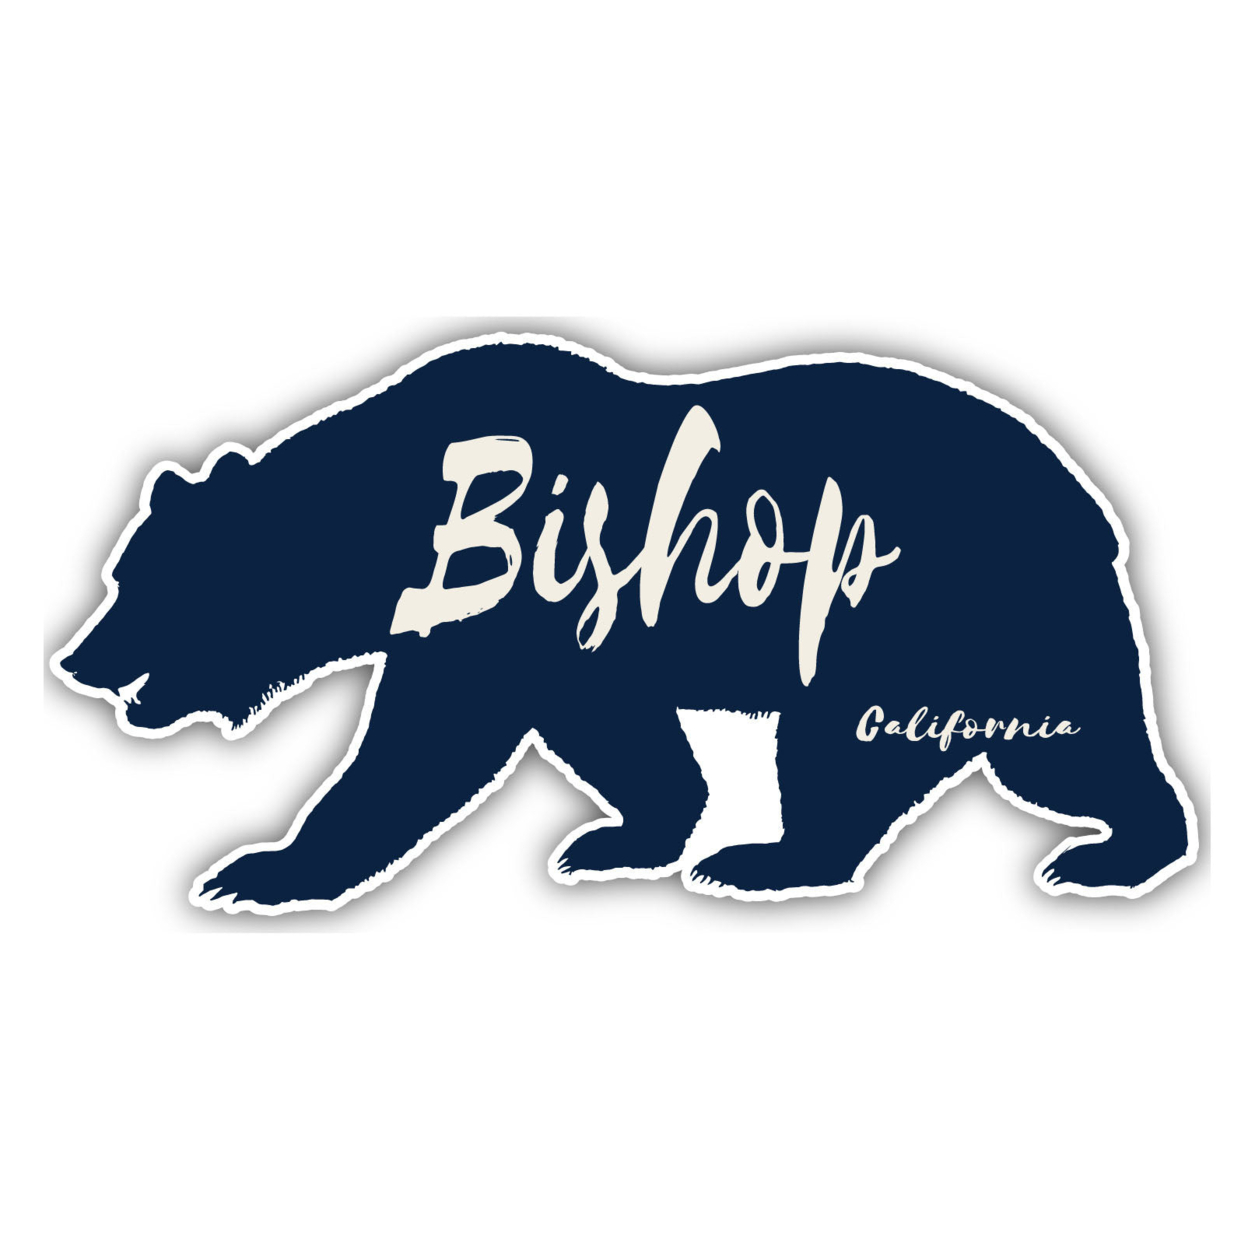 Bishop California Souvenir Decorative Stickers (Choose Theme And Size) - 4-Pack, 12-Inch, Tent